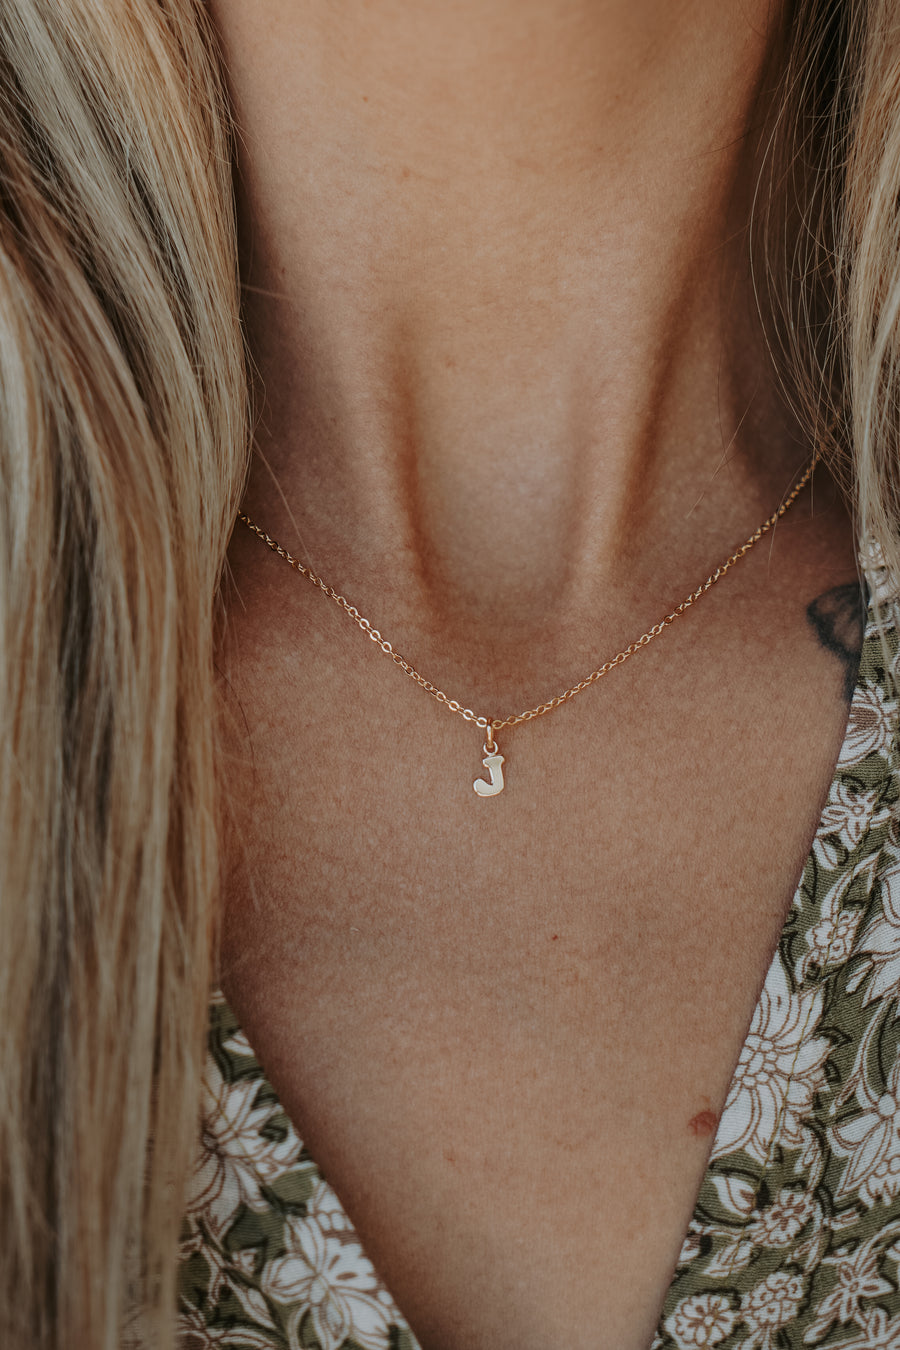 Love Letter Necklaces in 14k Gold-Fill